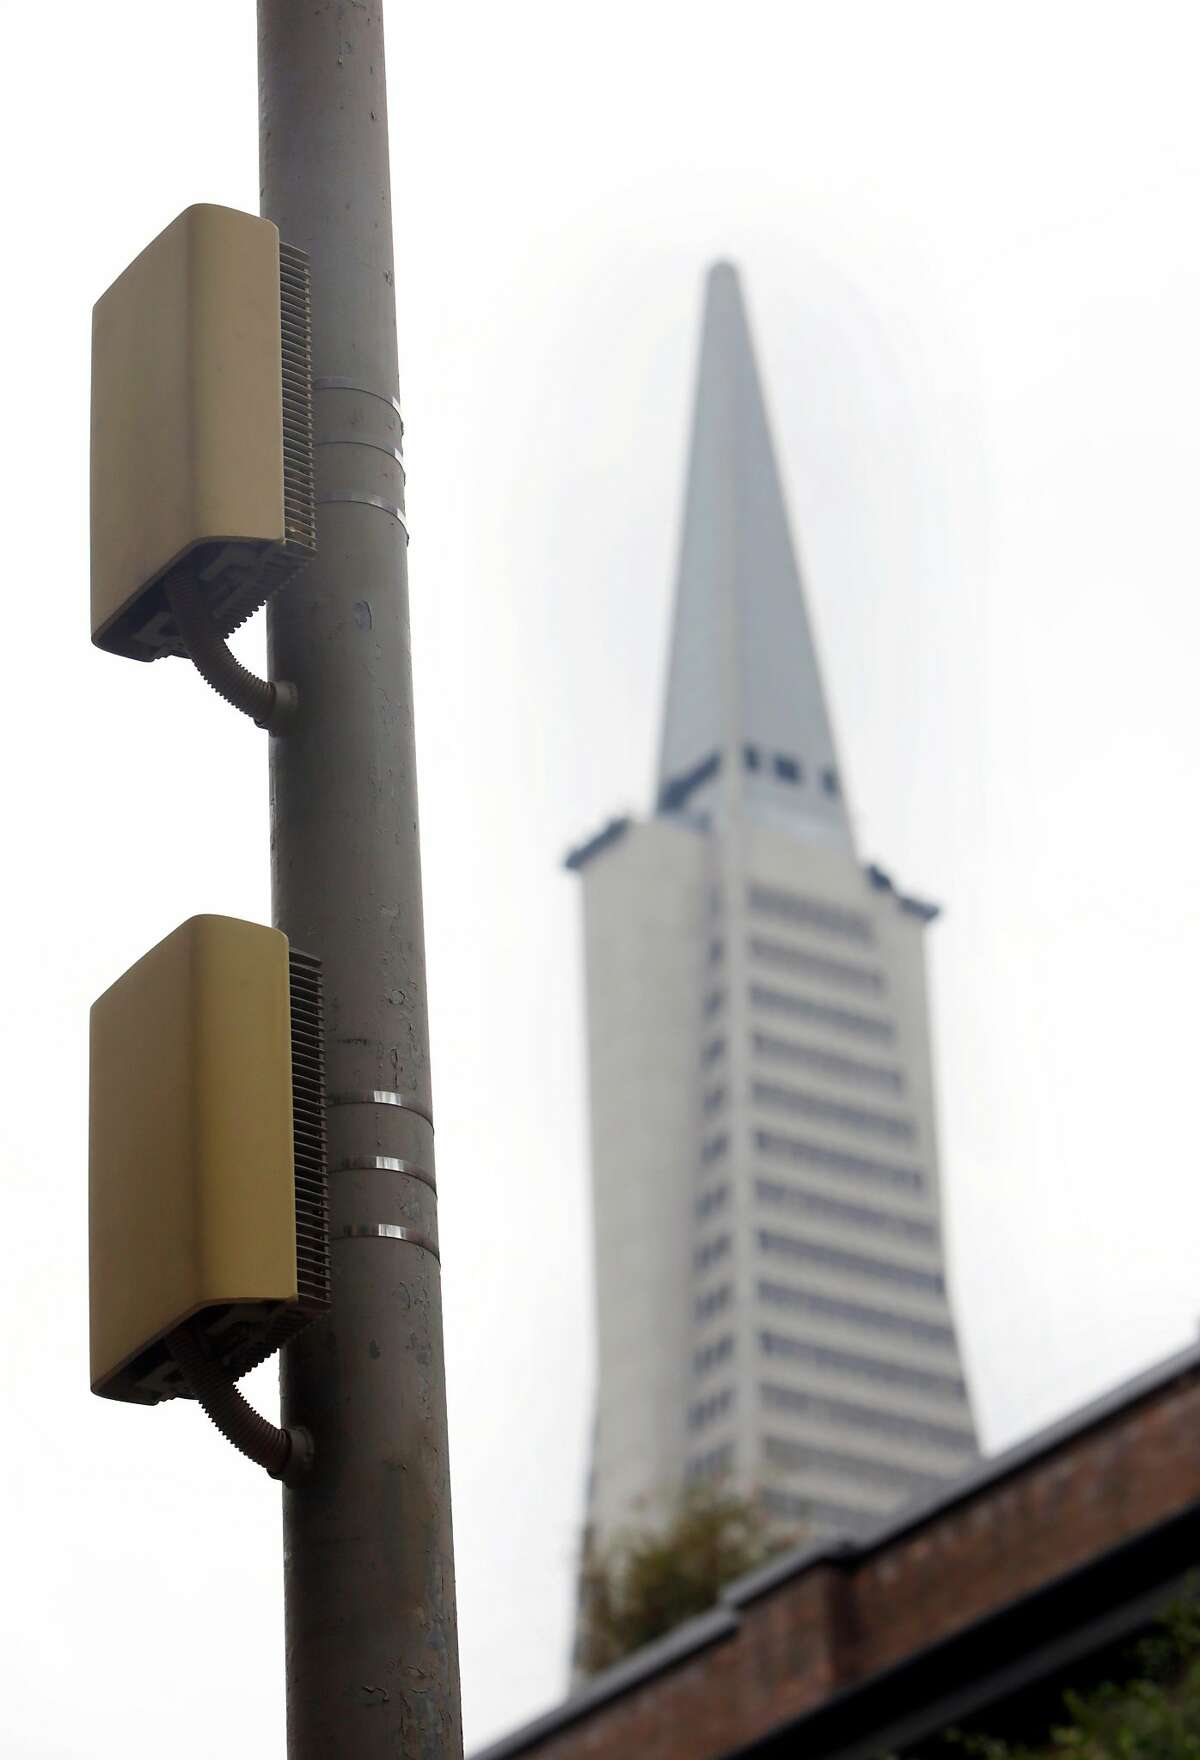 The power amplifier for a small cell is seen on a light pole on Wednesday, February 2, 2017 in San Francisco, Calif.